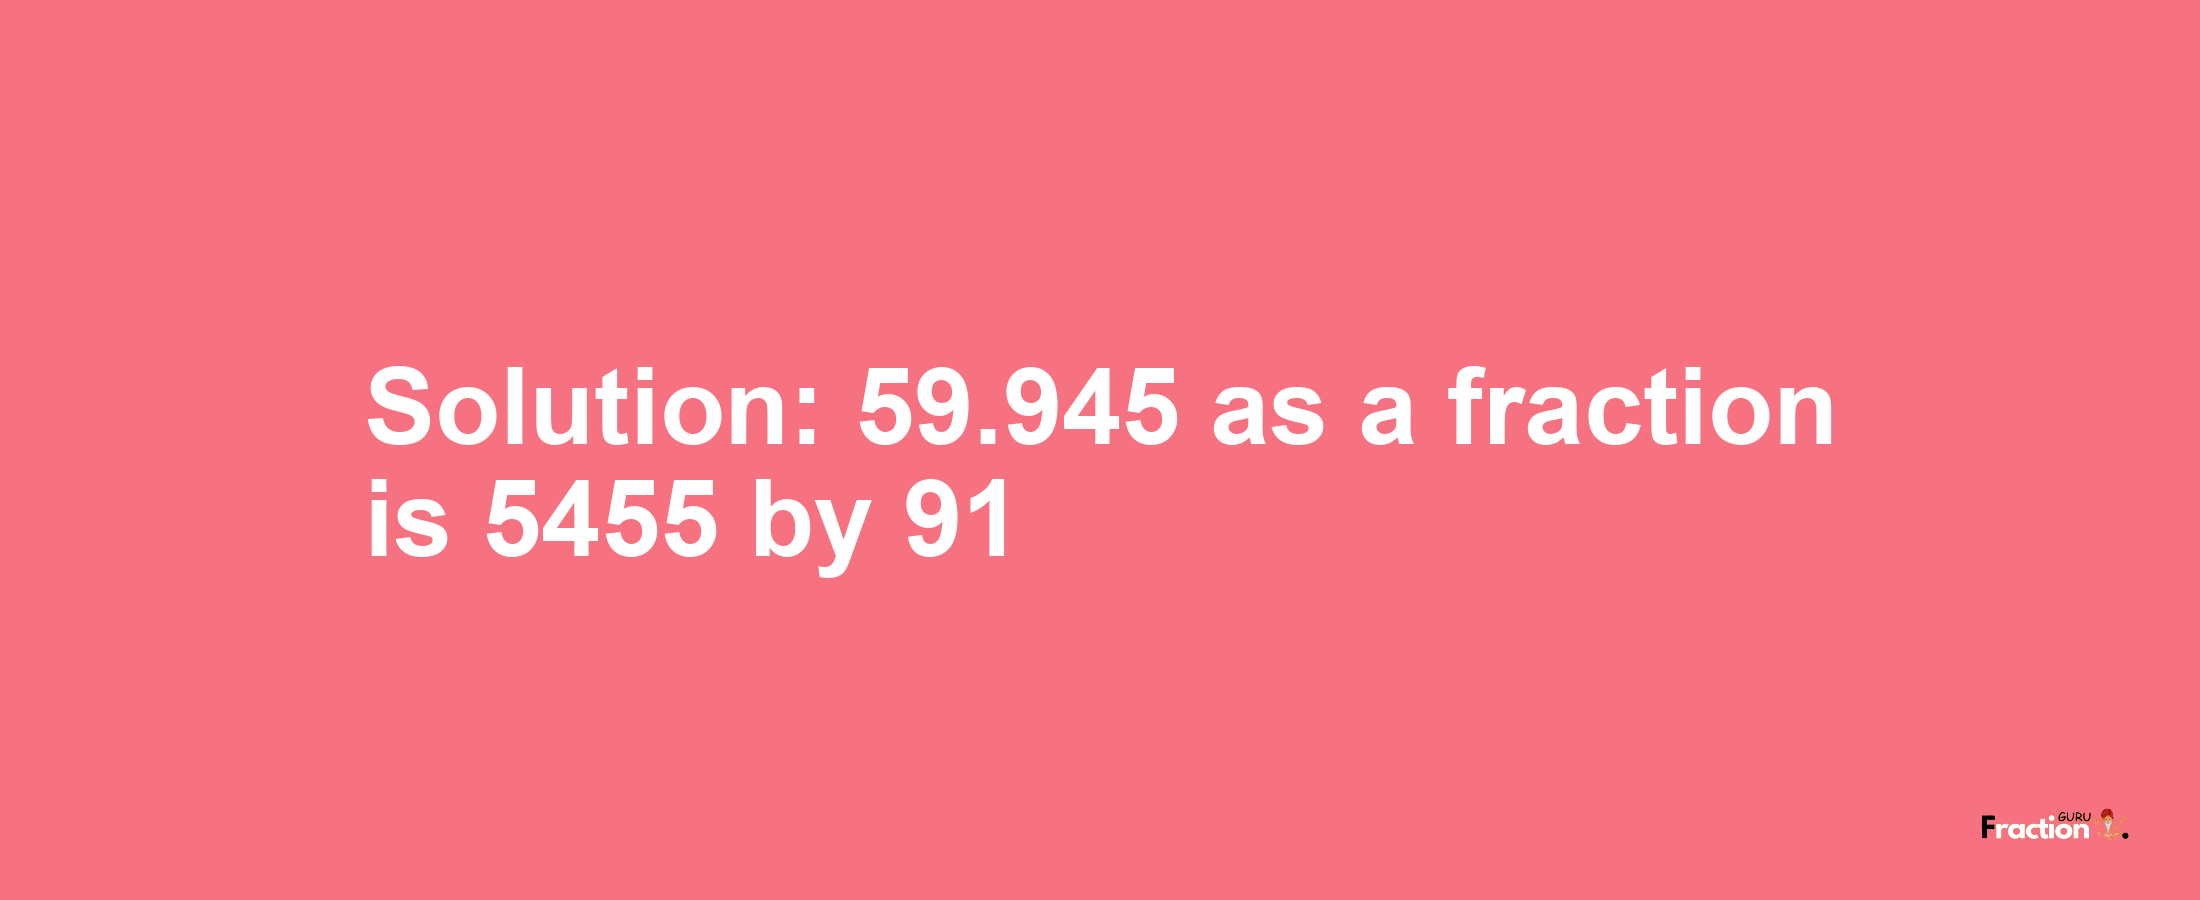 Solution:59.945 as a fraction is 5455/91